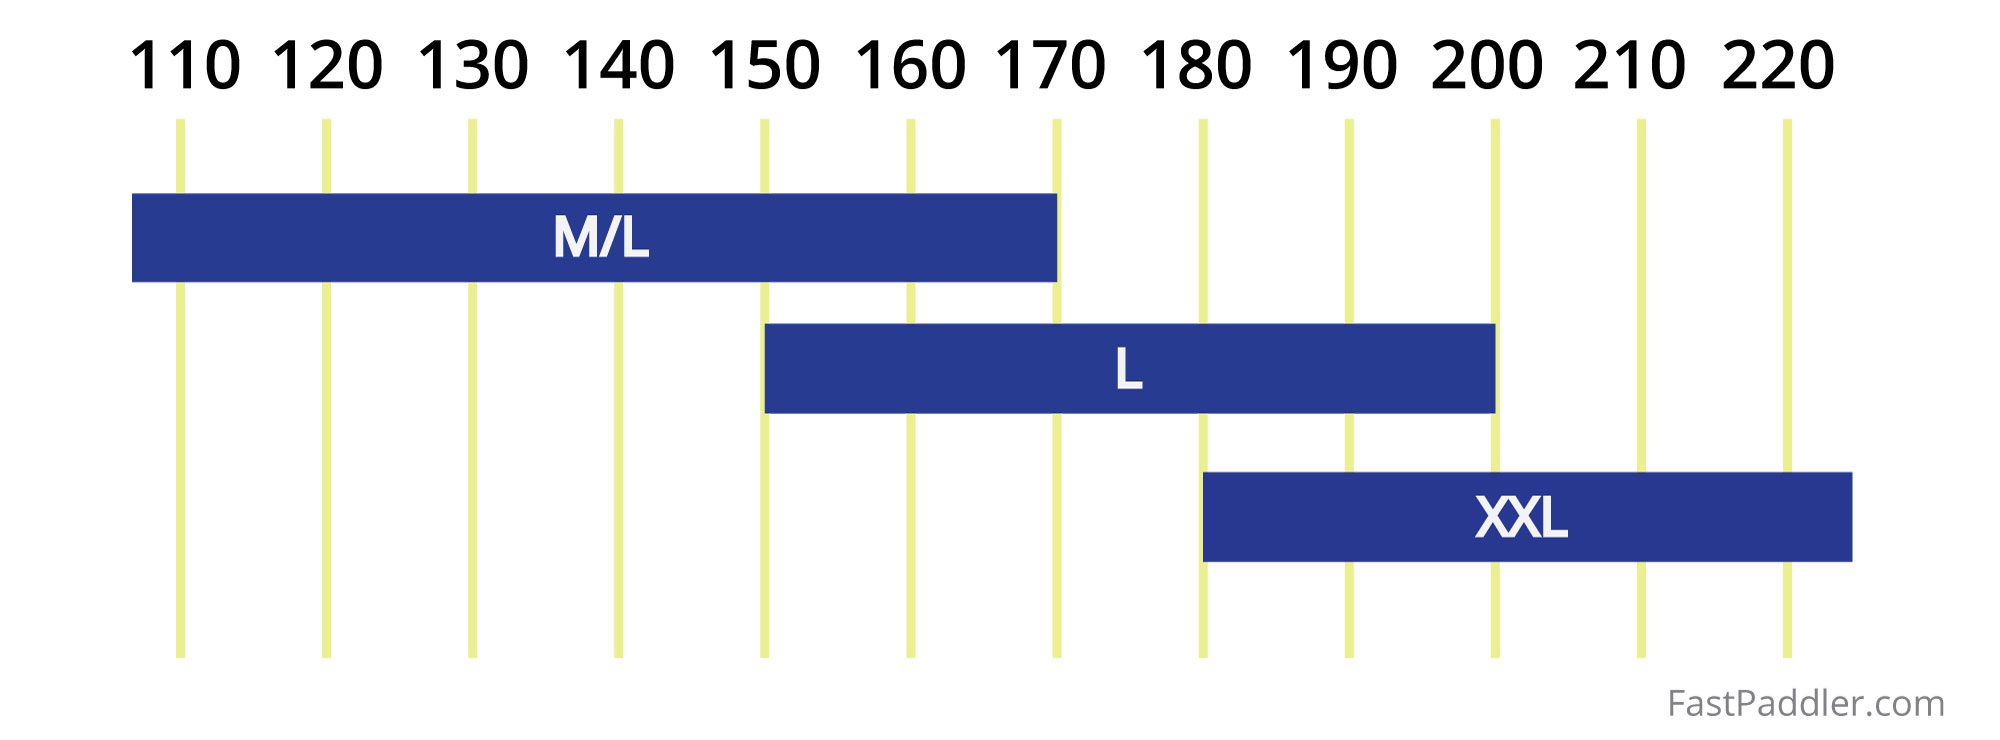 Surfski size chart with wider weight capacity